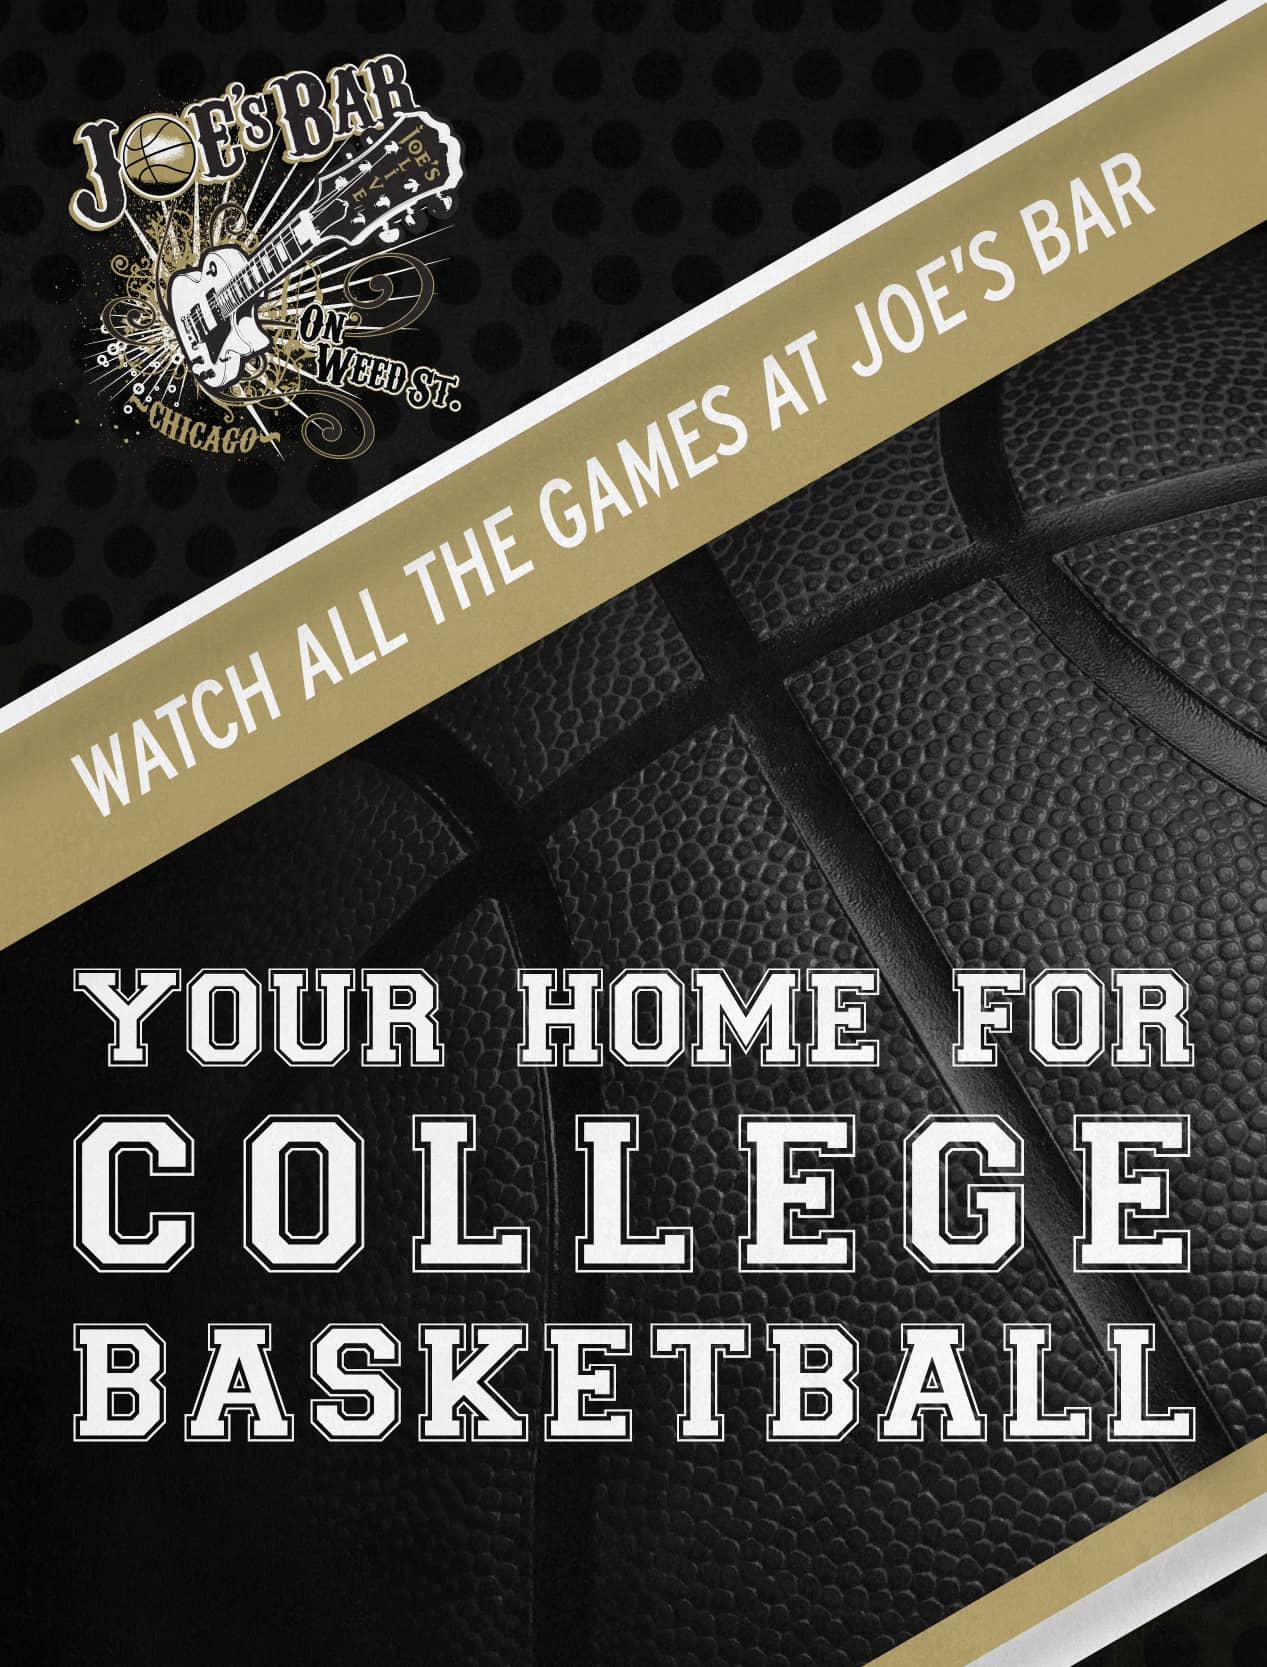 Watch College Basketball at Joe's on Weed St.